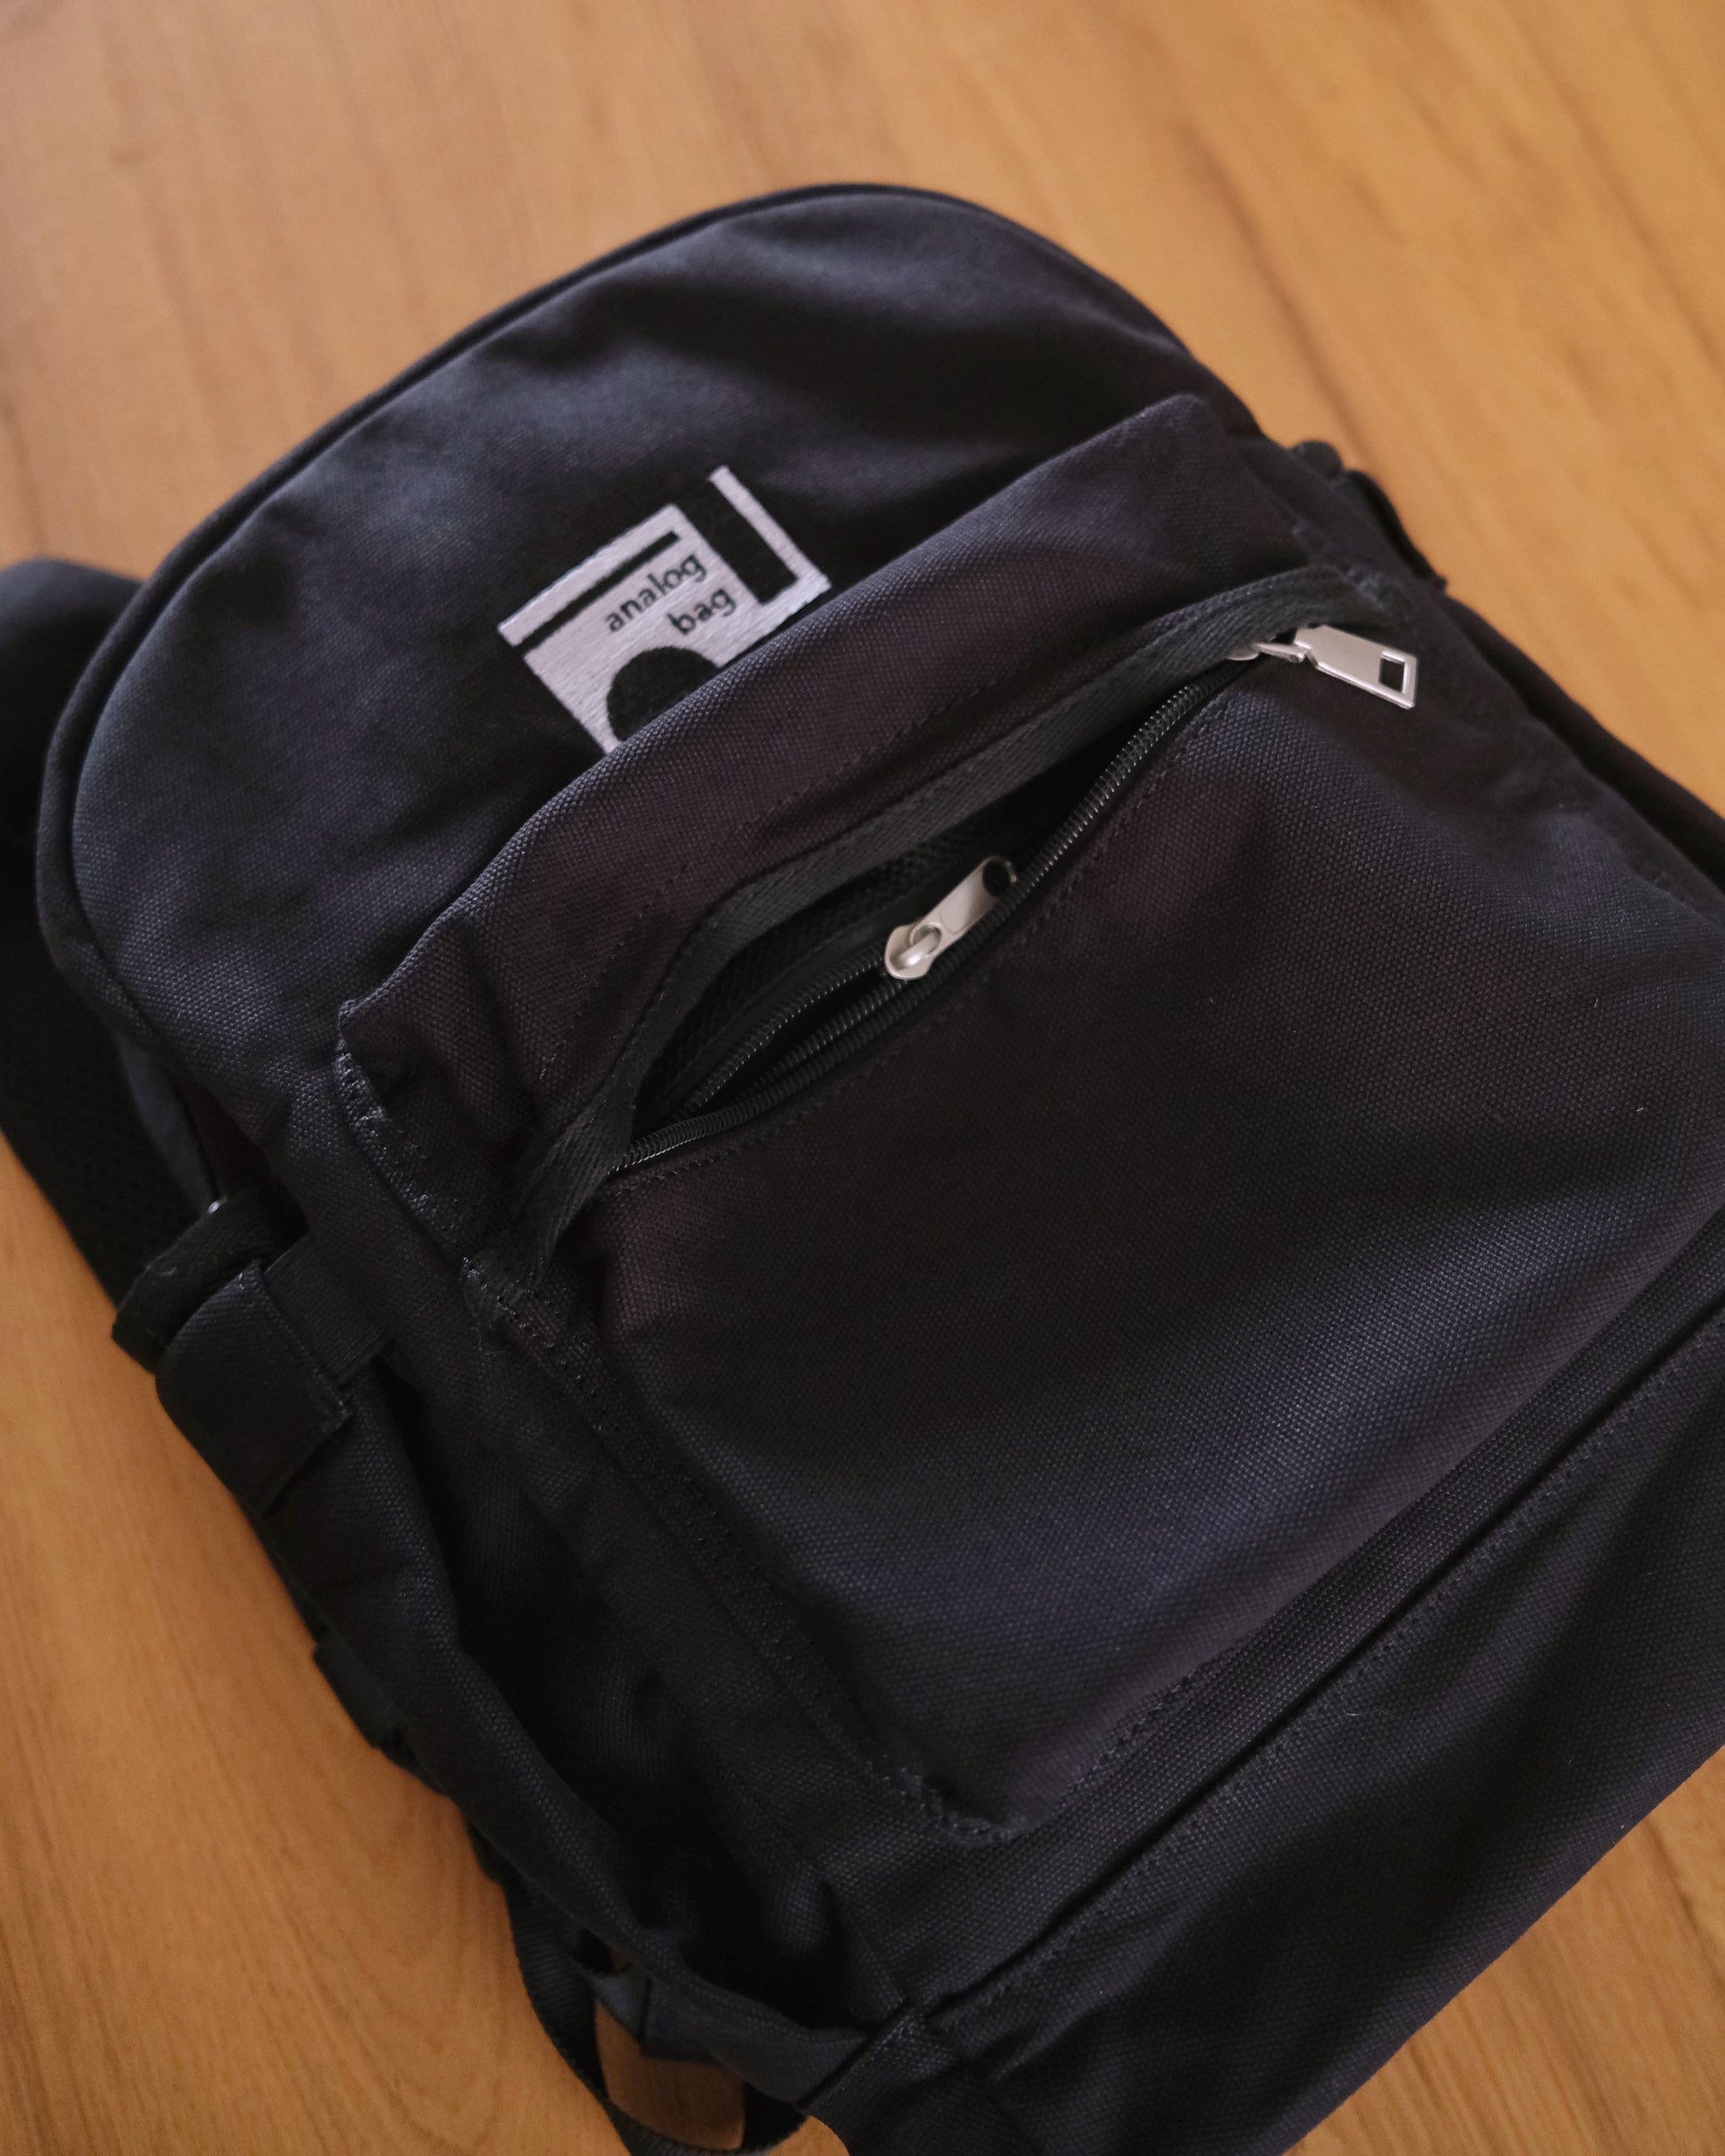 The Black Analog Backpack (Water Repellent).